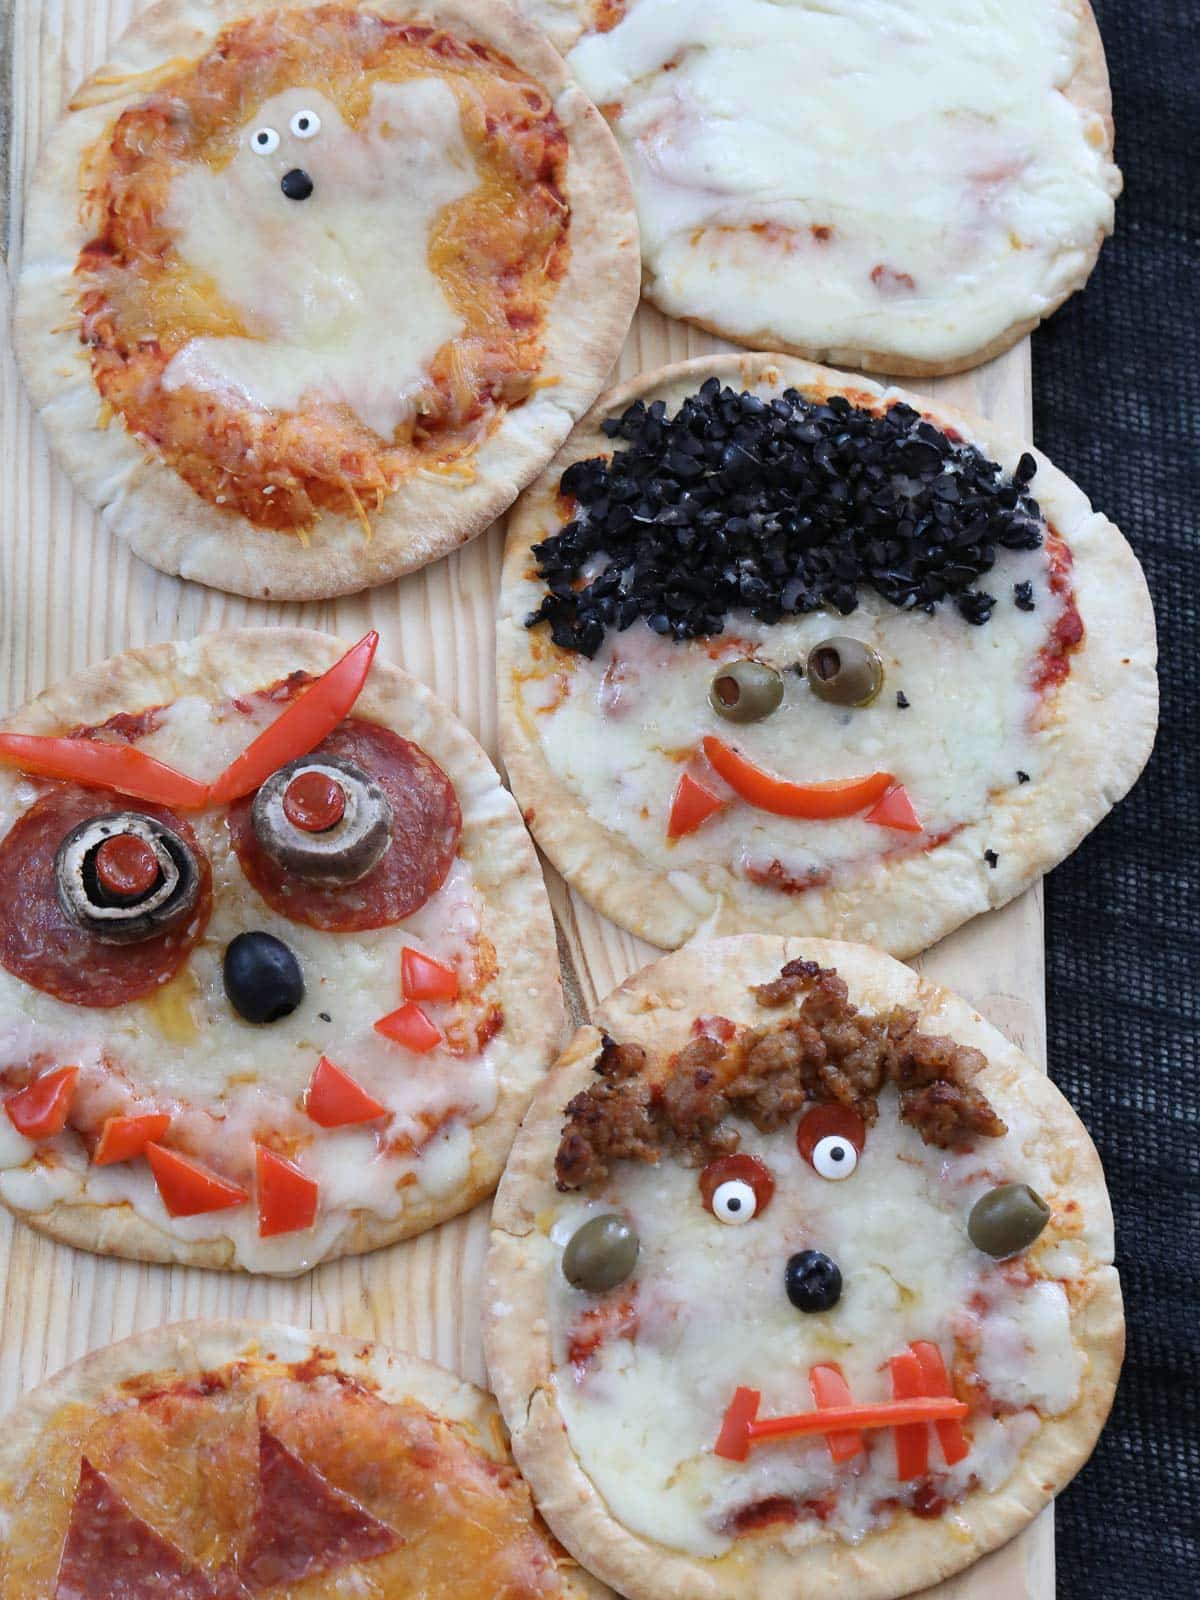 6 different Halloween pizzas baked on a board decorated like jack o lantern, Dracula, mummy, ghost, Frankenstein, and a monster. 